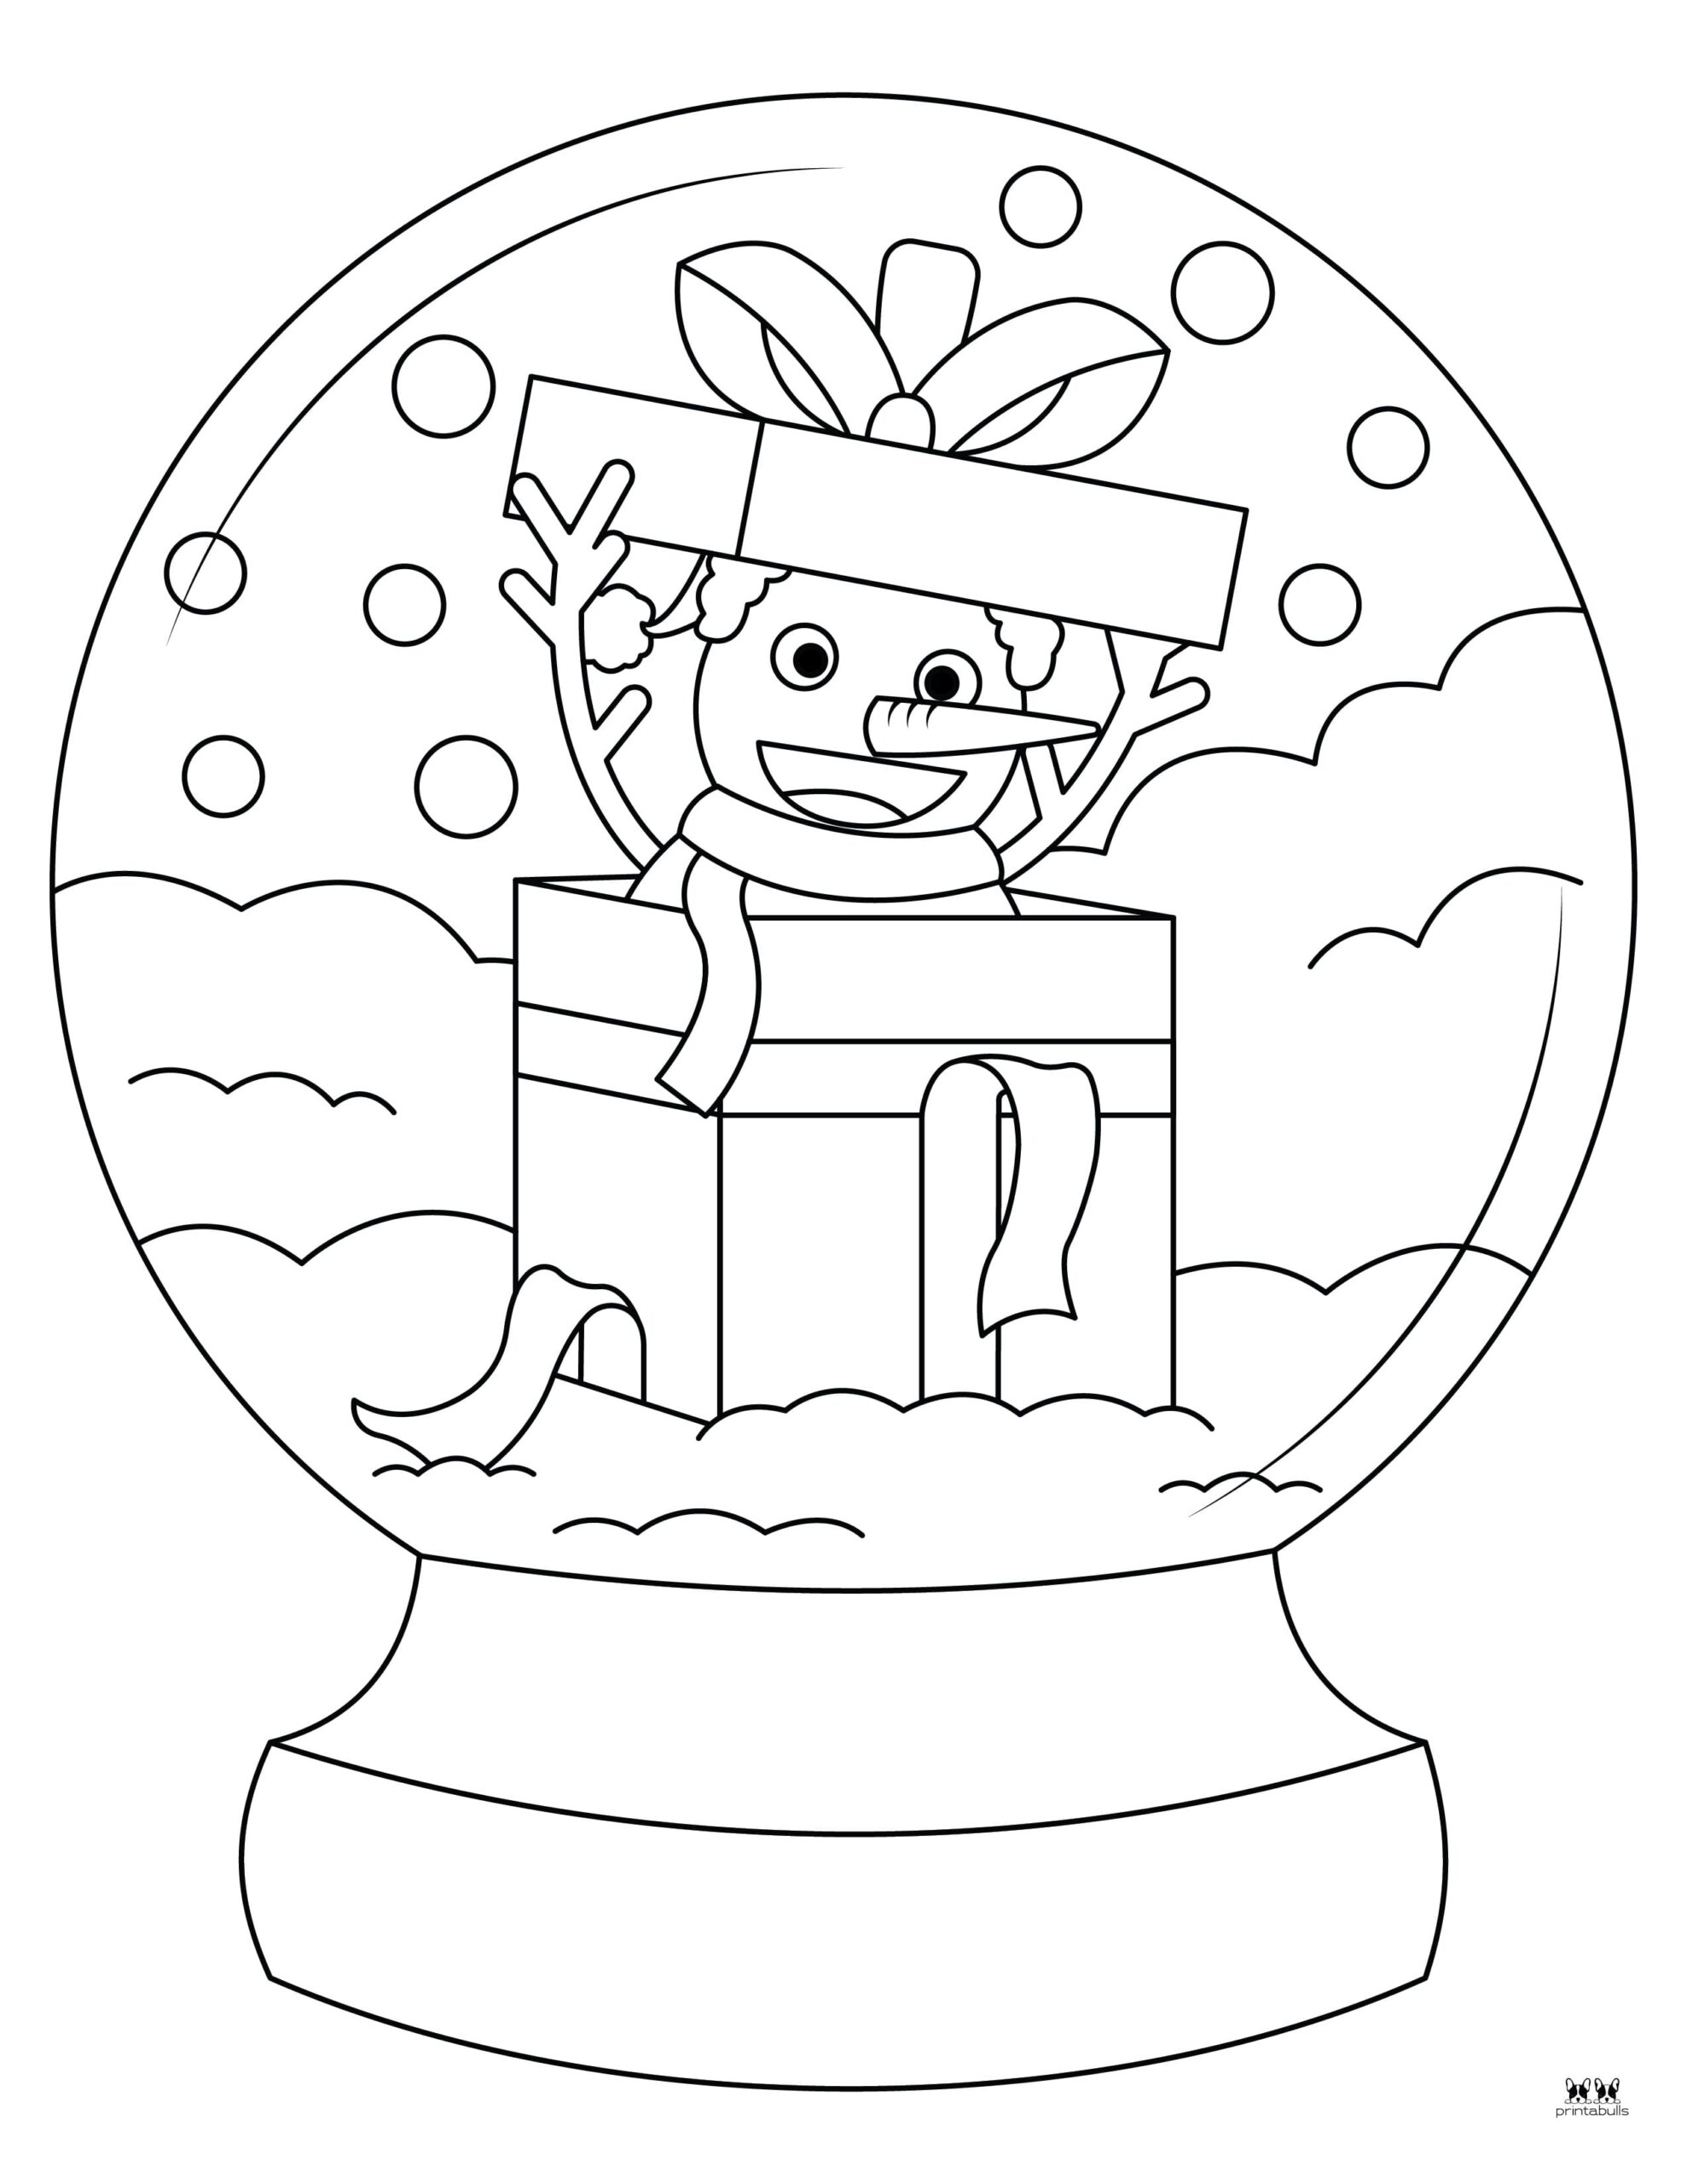 Snow Globe Coloring Pages & Templates - 25 Pages | Printabulls